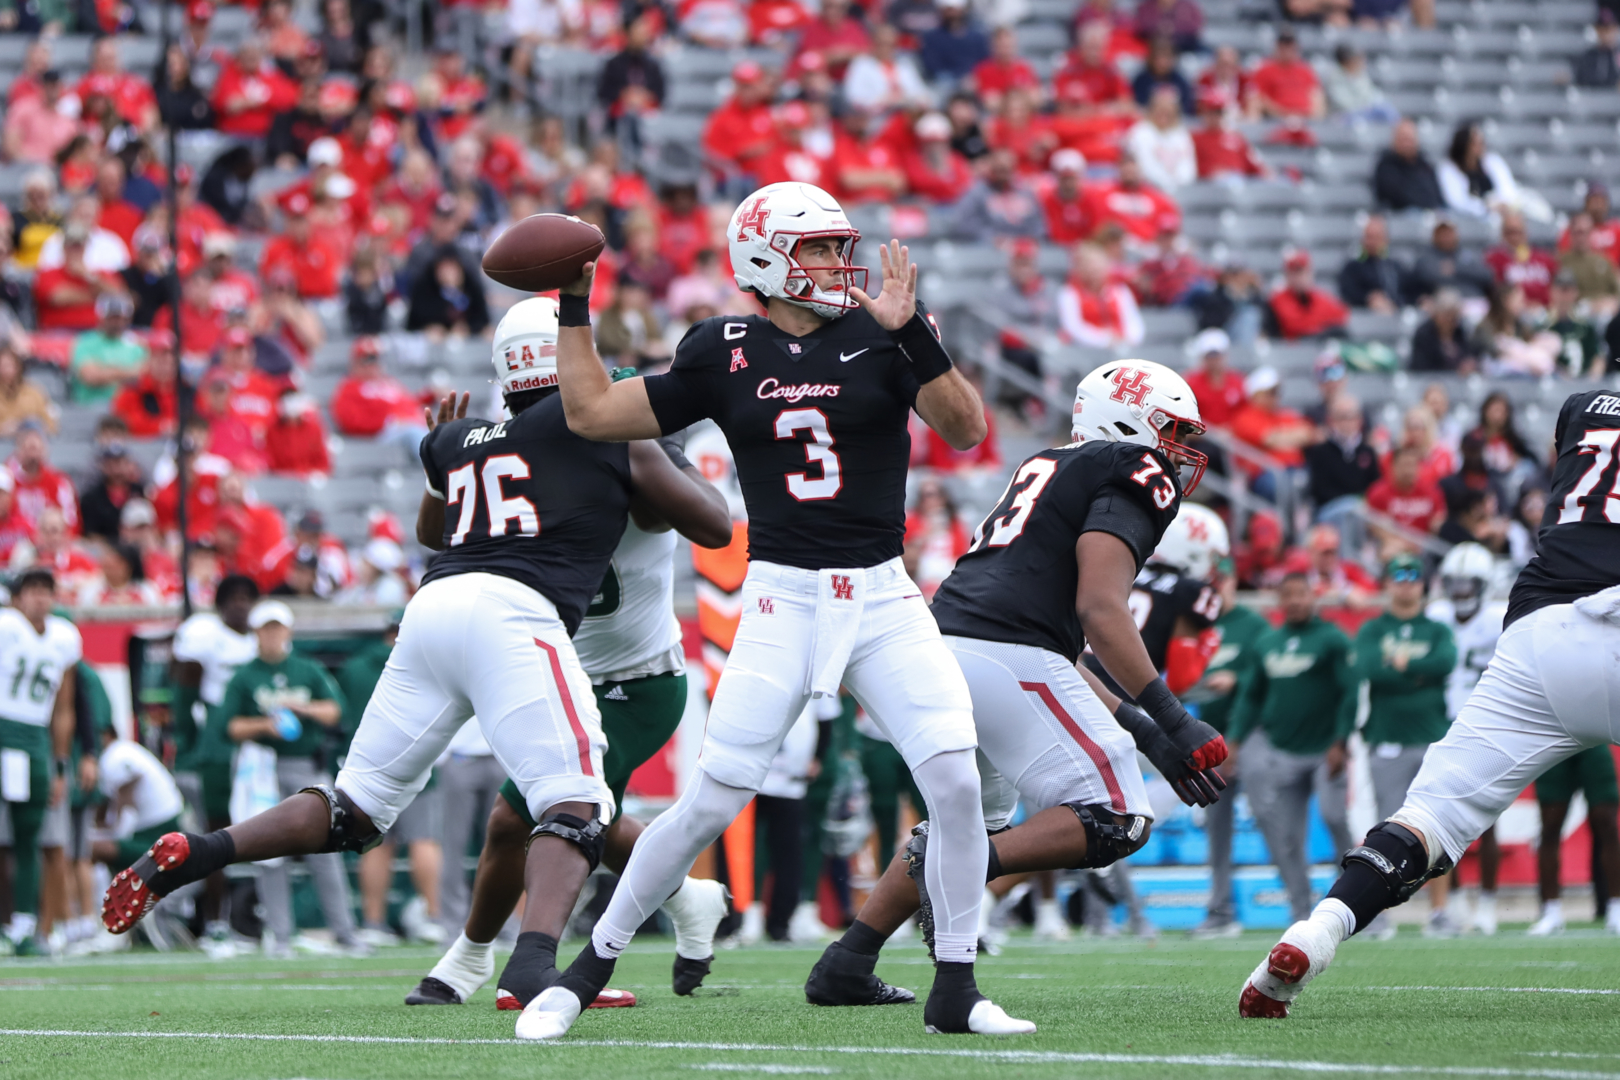 UH football senior quarterback Clayton Tune has taken home three of the last four AAC Offensive Player of the Week awards. | Sean Thomas/The Cougar